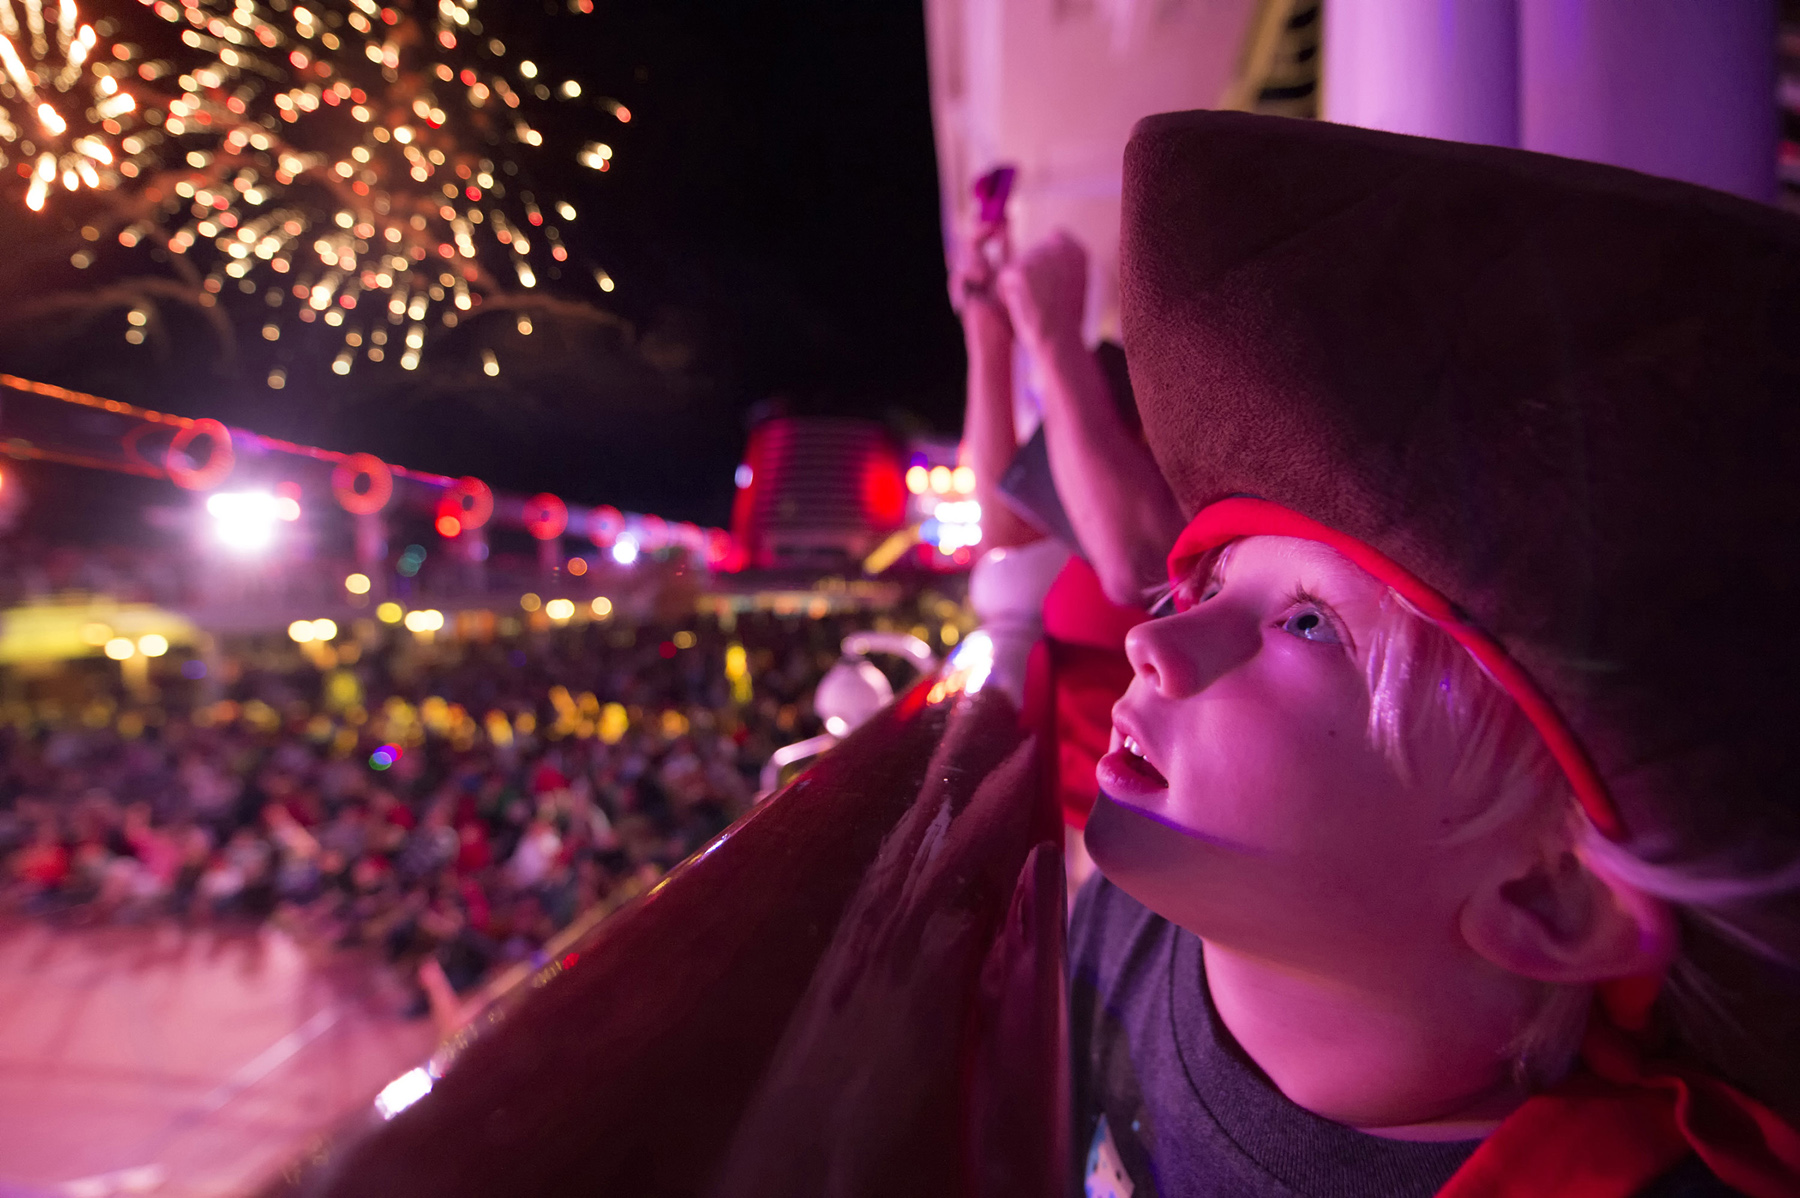 Little boy dressed up for Pirate Night on a Disney cruise ship with fireworks in background (source: Disney Cruise Line)